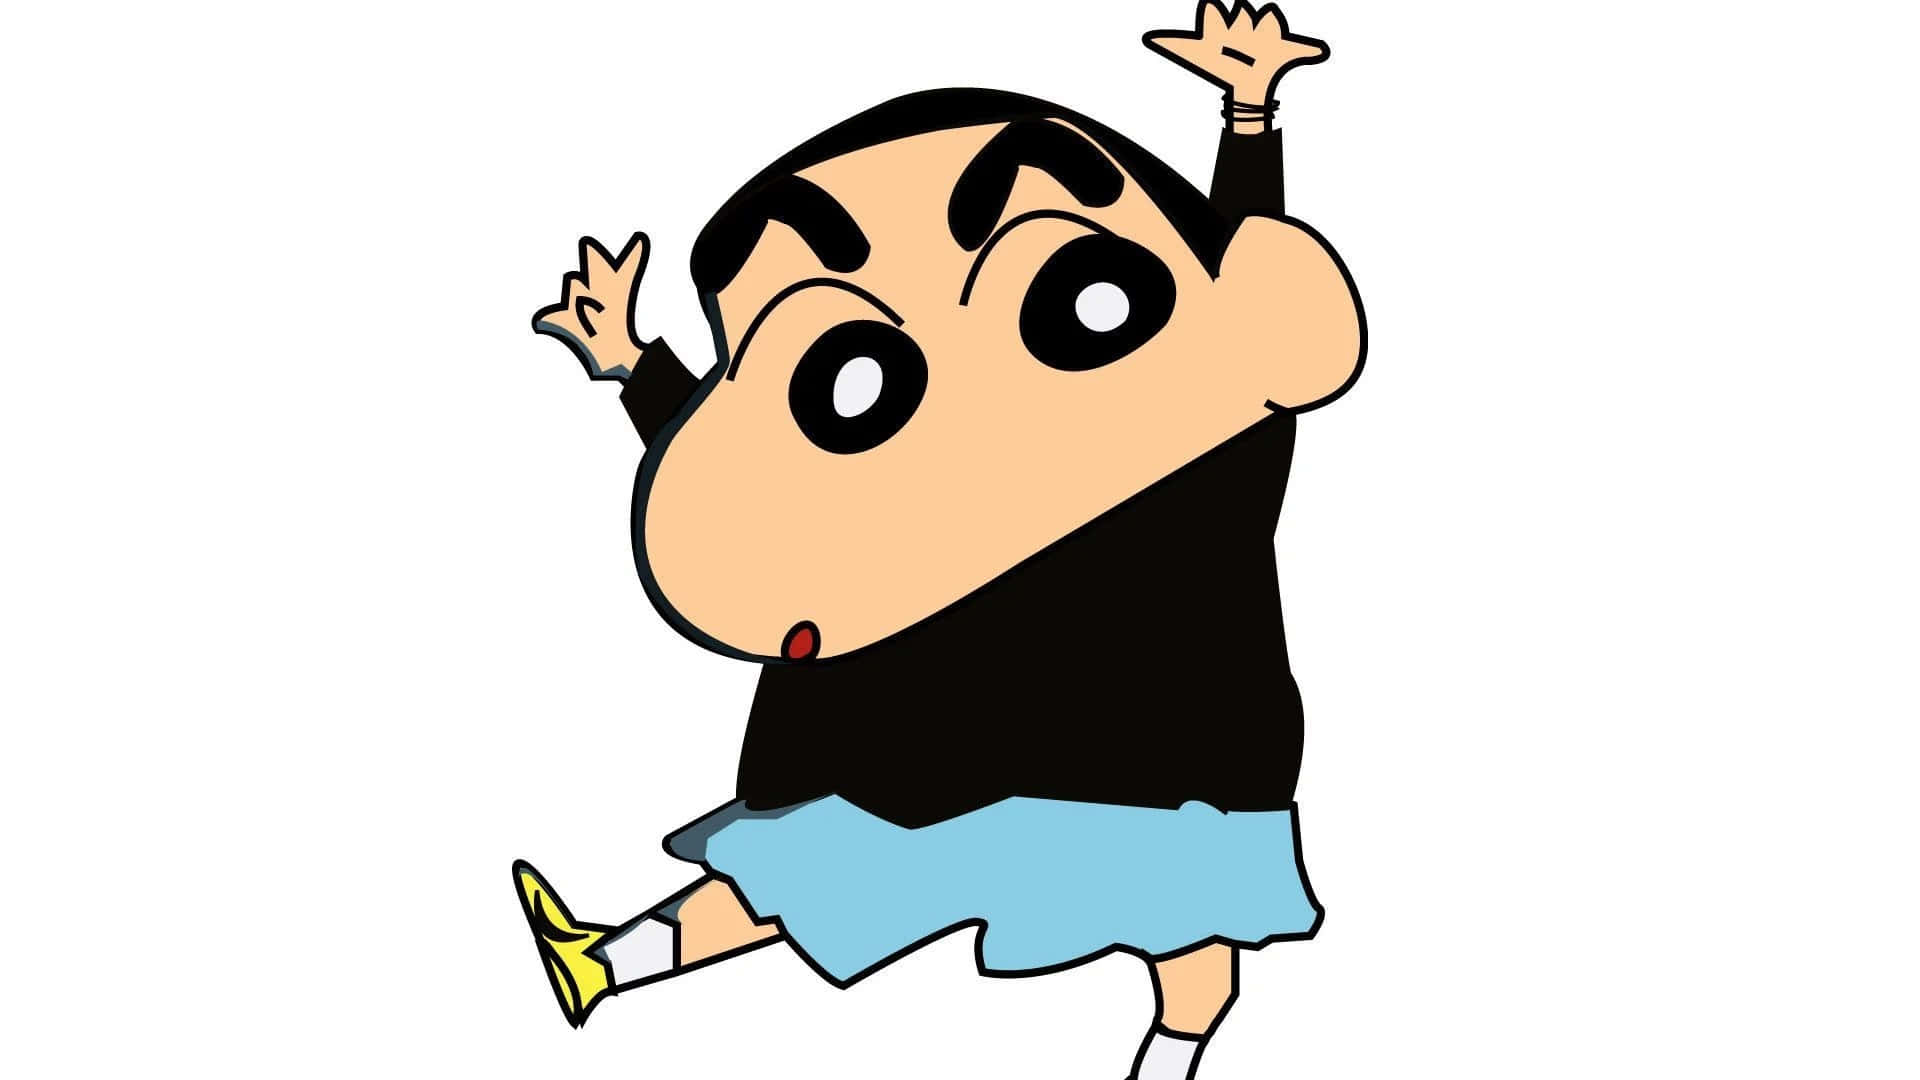 Crayon Shin-chan is a mischievous 5-year-old with a wild imagination!